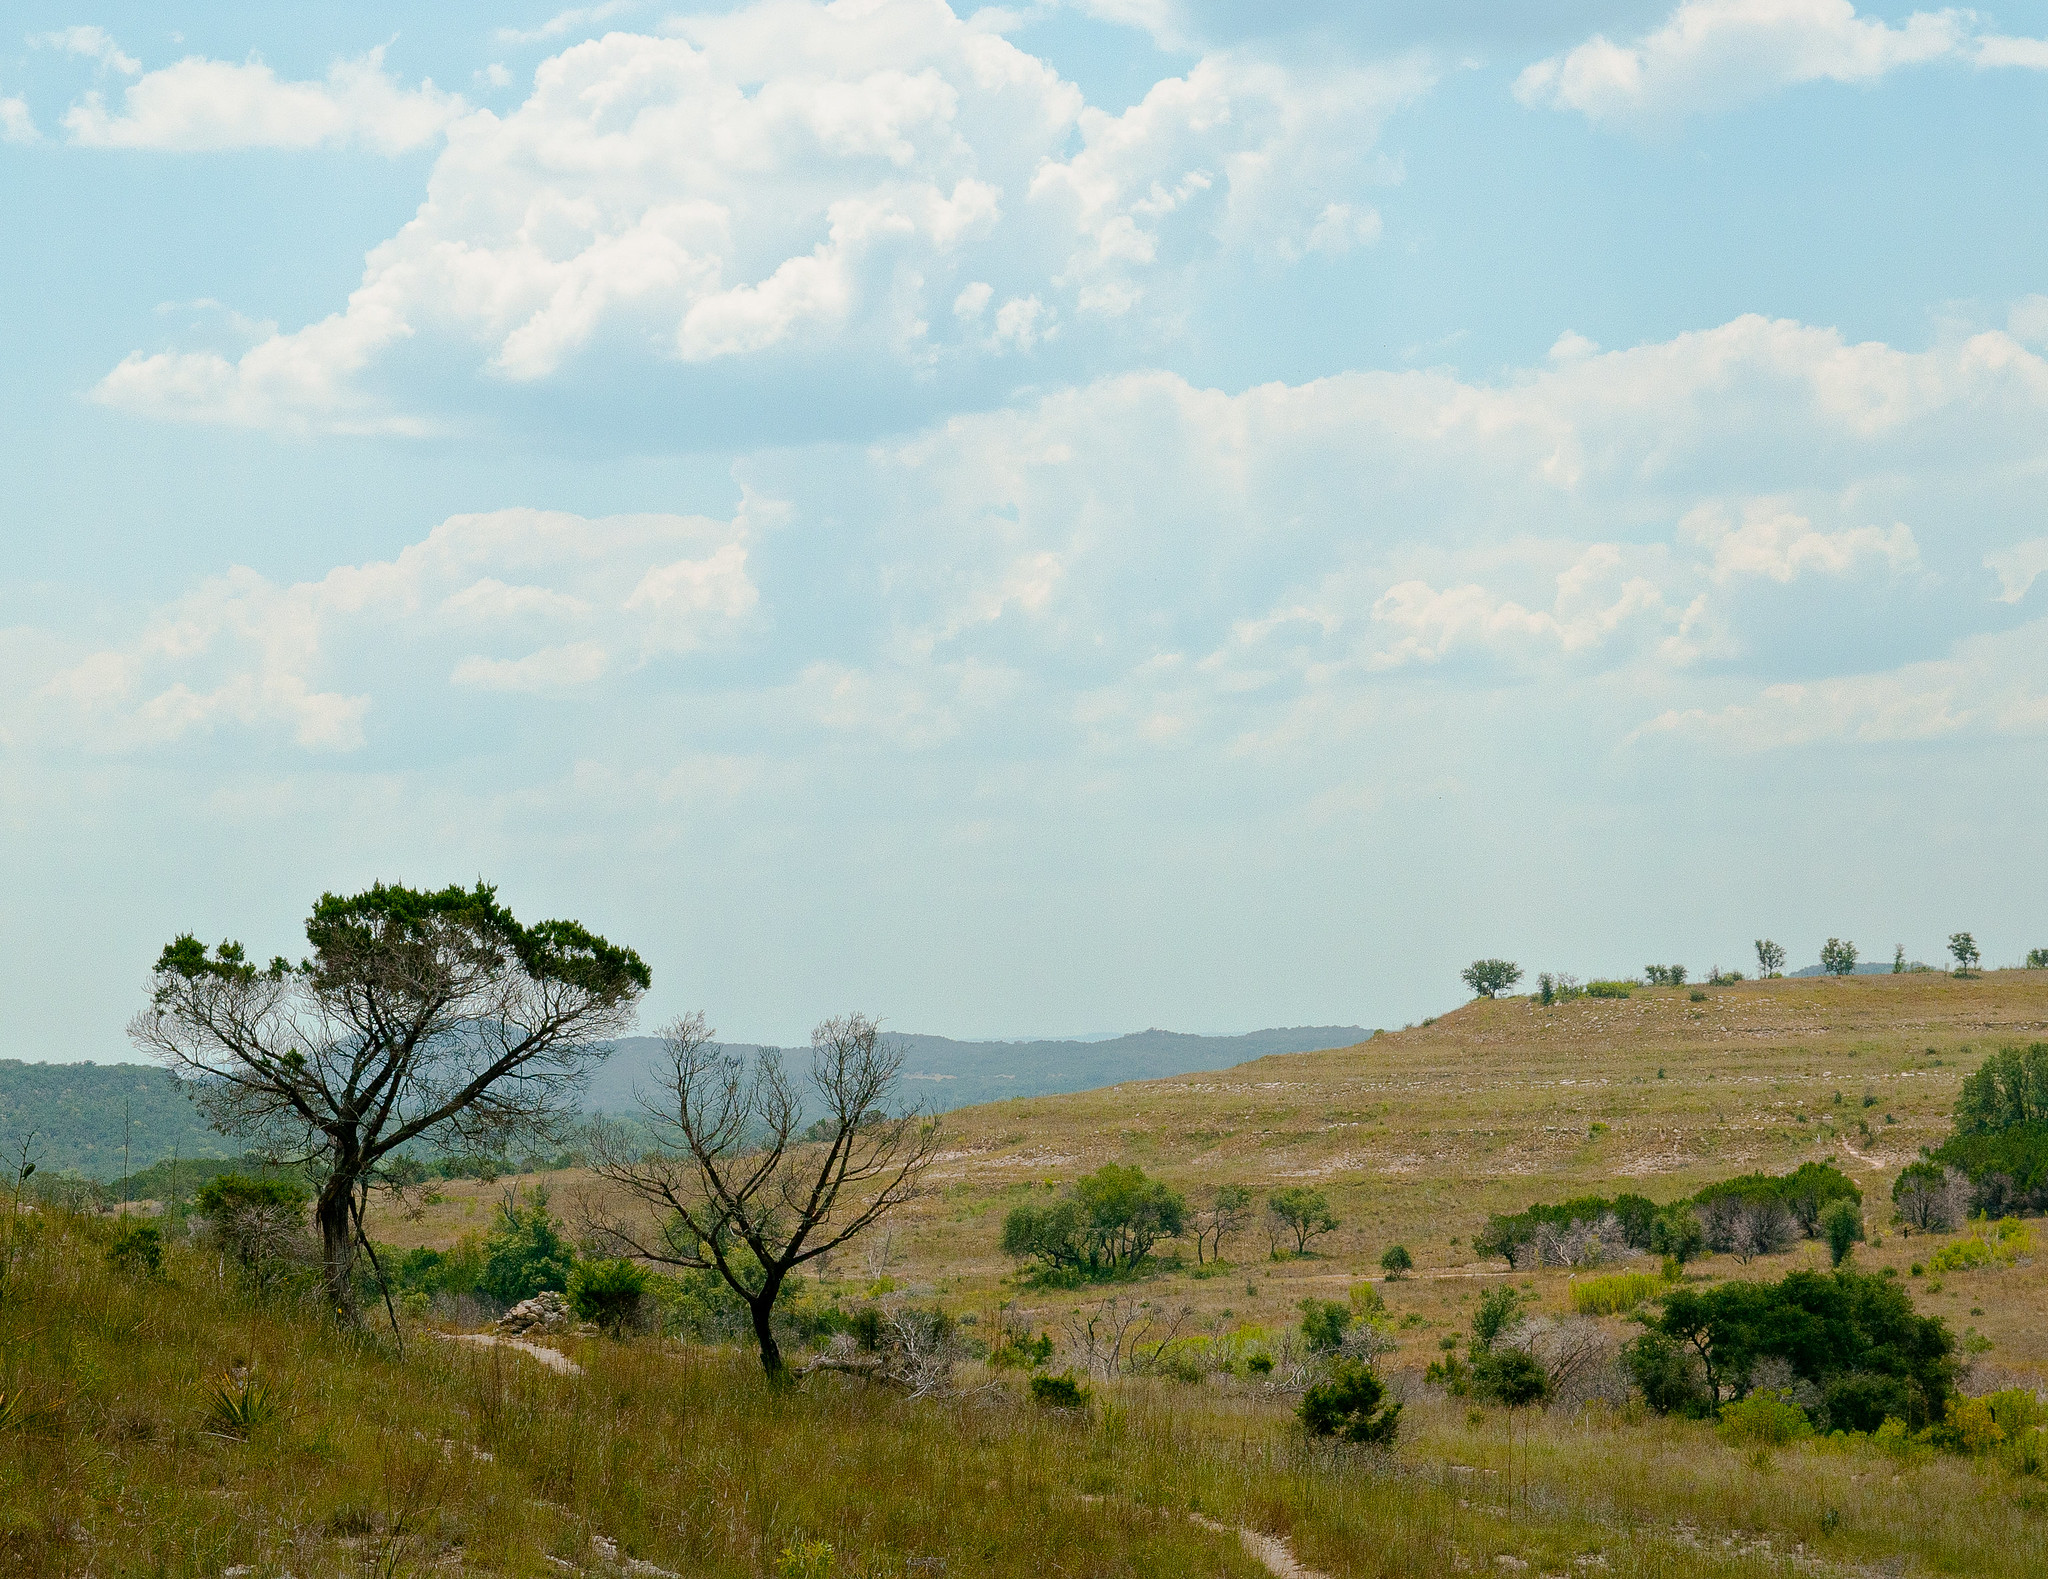 A Texas savanna under blue skies with puffy white clouds and a tree in the foreground